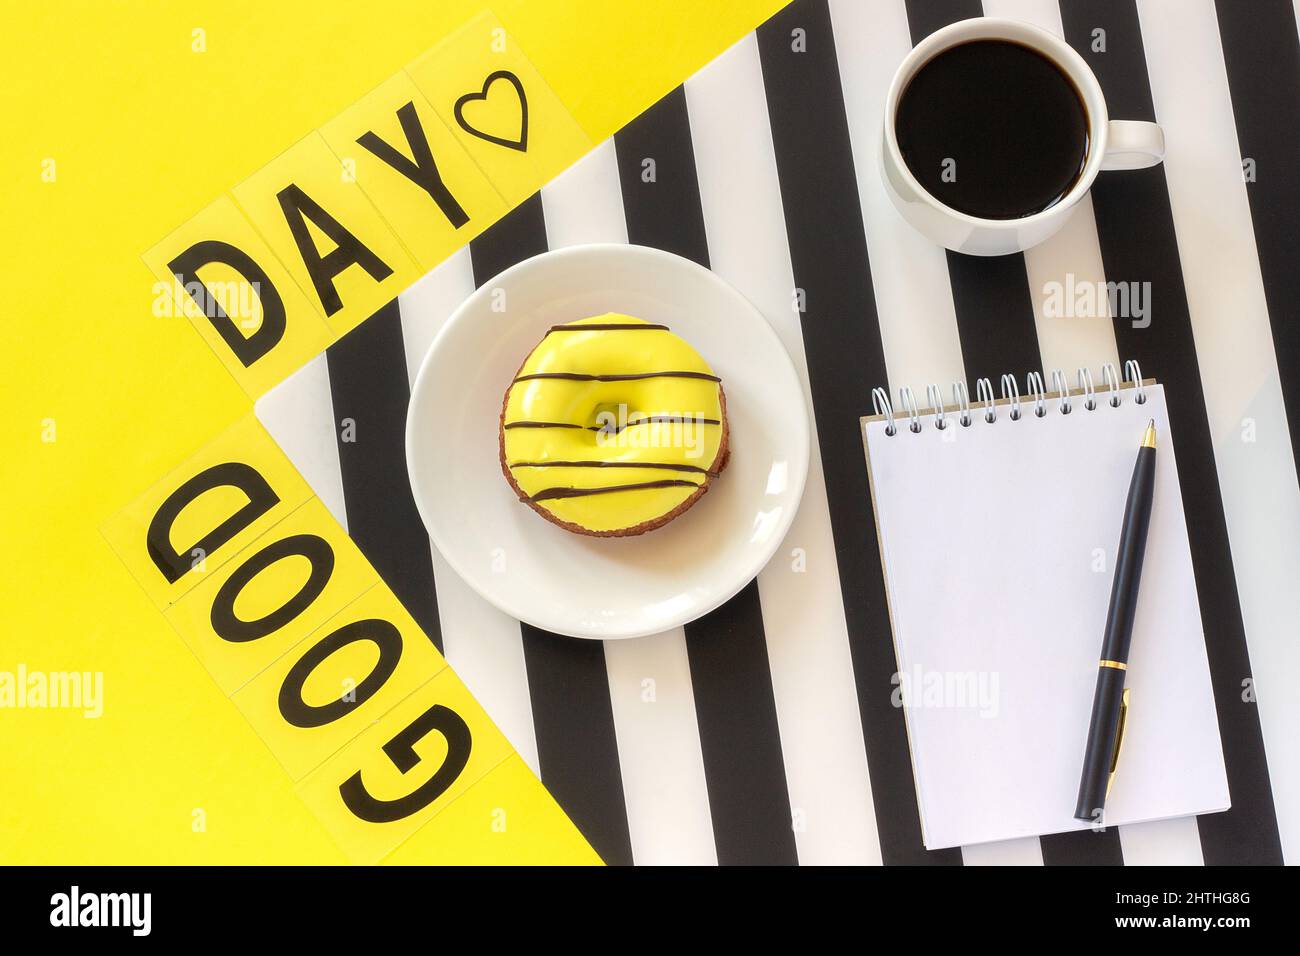 Text Good day, Coffee, and yellow rose on stylish black and white napkin on yellow background . Concept Flat lay Top view. Stock Photo